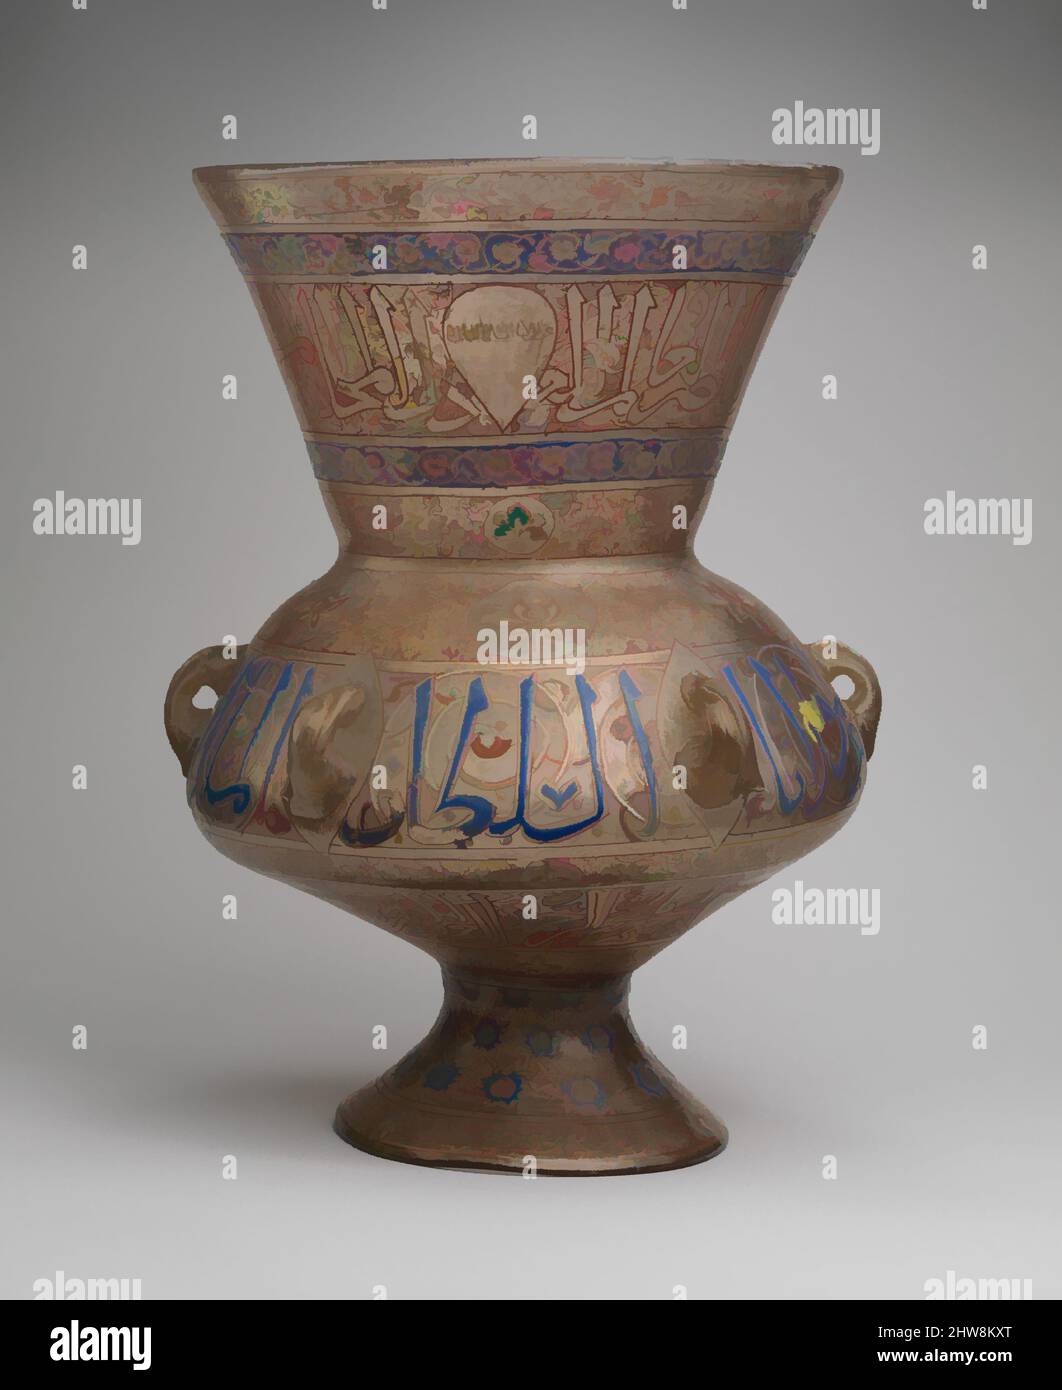 Art inspired by Mosque Lamp Bearing the Name of the Mamluk Sultan al-Malik al-Nasir, ca. 1340, Attributed to Syria, Glass, colorless with brown tinge; blown, applied blown foot, applied handles; enameled and gilded, H. 13 in. (33 cm), Glass, Classic works modernized by Artotop with a splash of modernity. Shapes, color and value, eye-catching visual impact on art. Emotions through freedom of artworks in a contemporary way. A timeless message pursuing a wildly creative new direction. Artists turning to the digital medium and creating the Artotop NFT Stock Photo